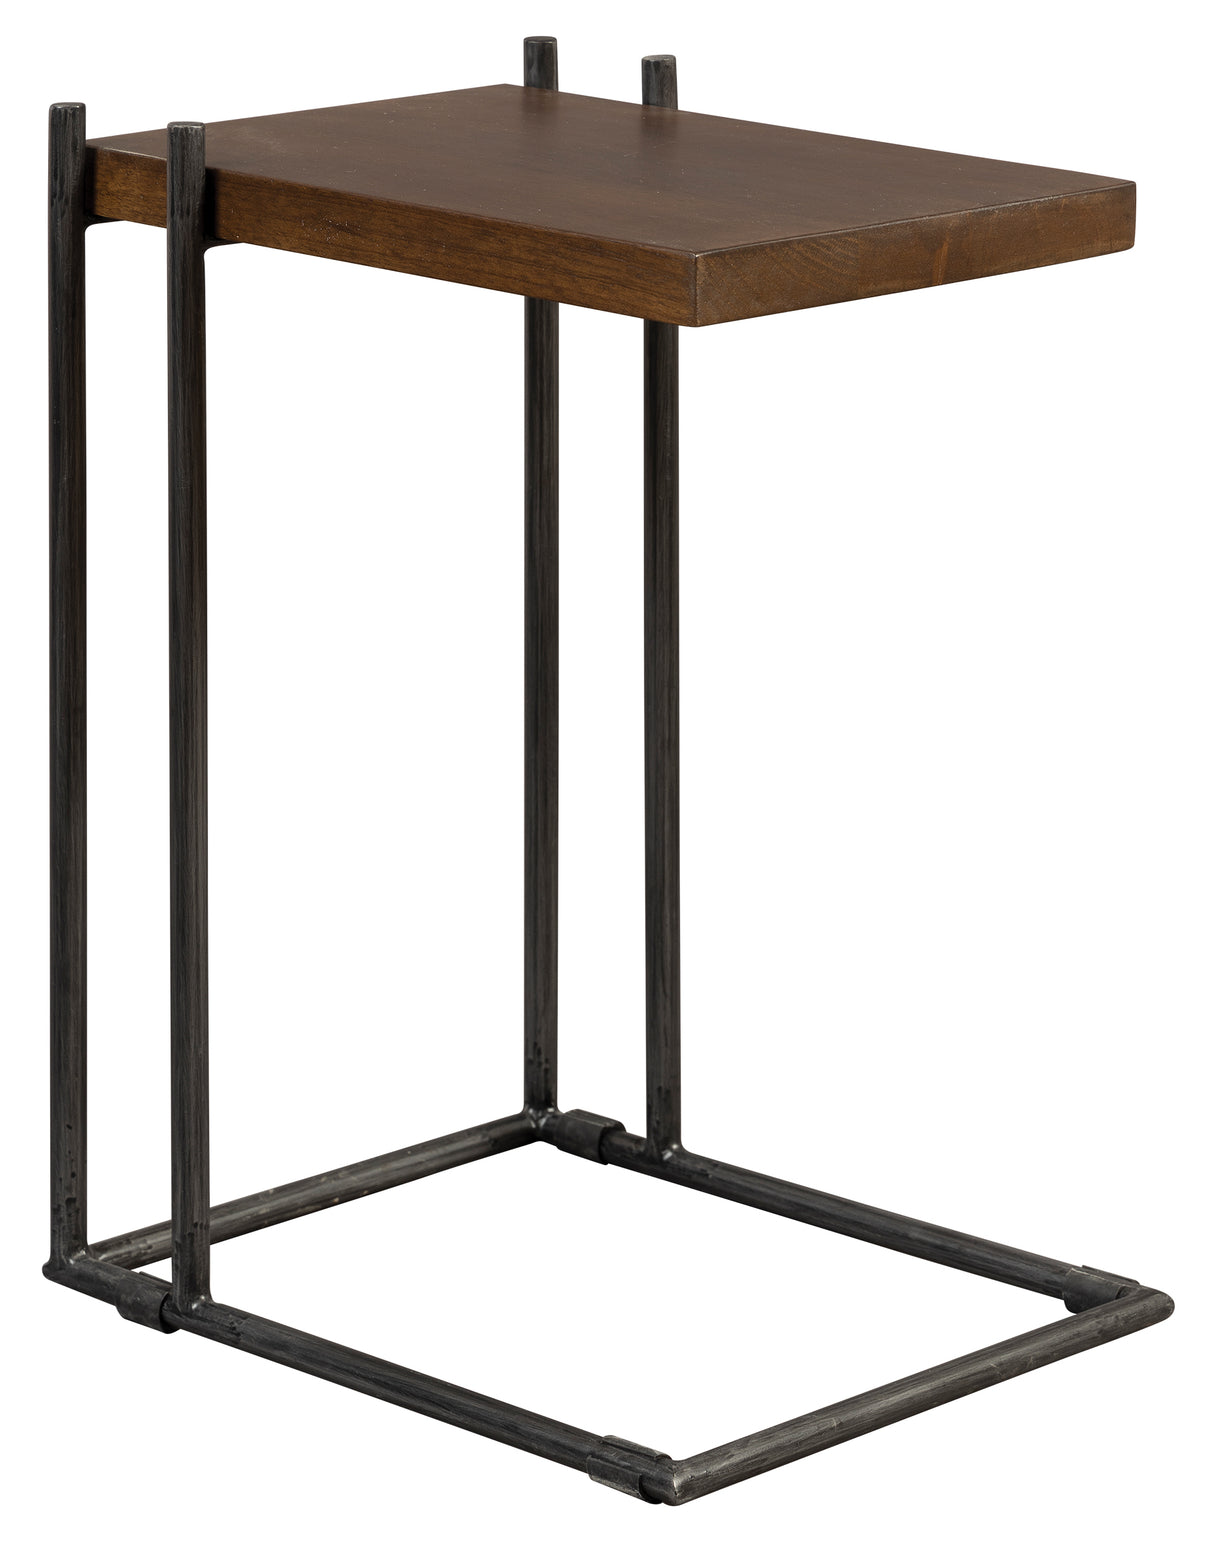 Hekman 28641 Accents 14in. x 18in. x 26.25in. End Table